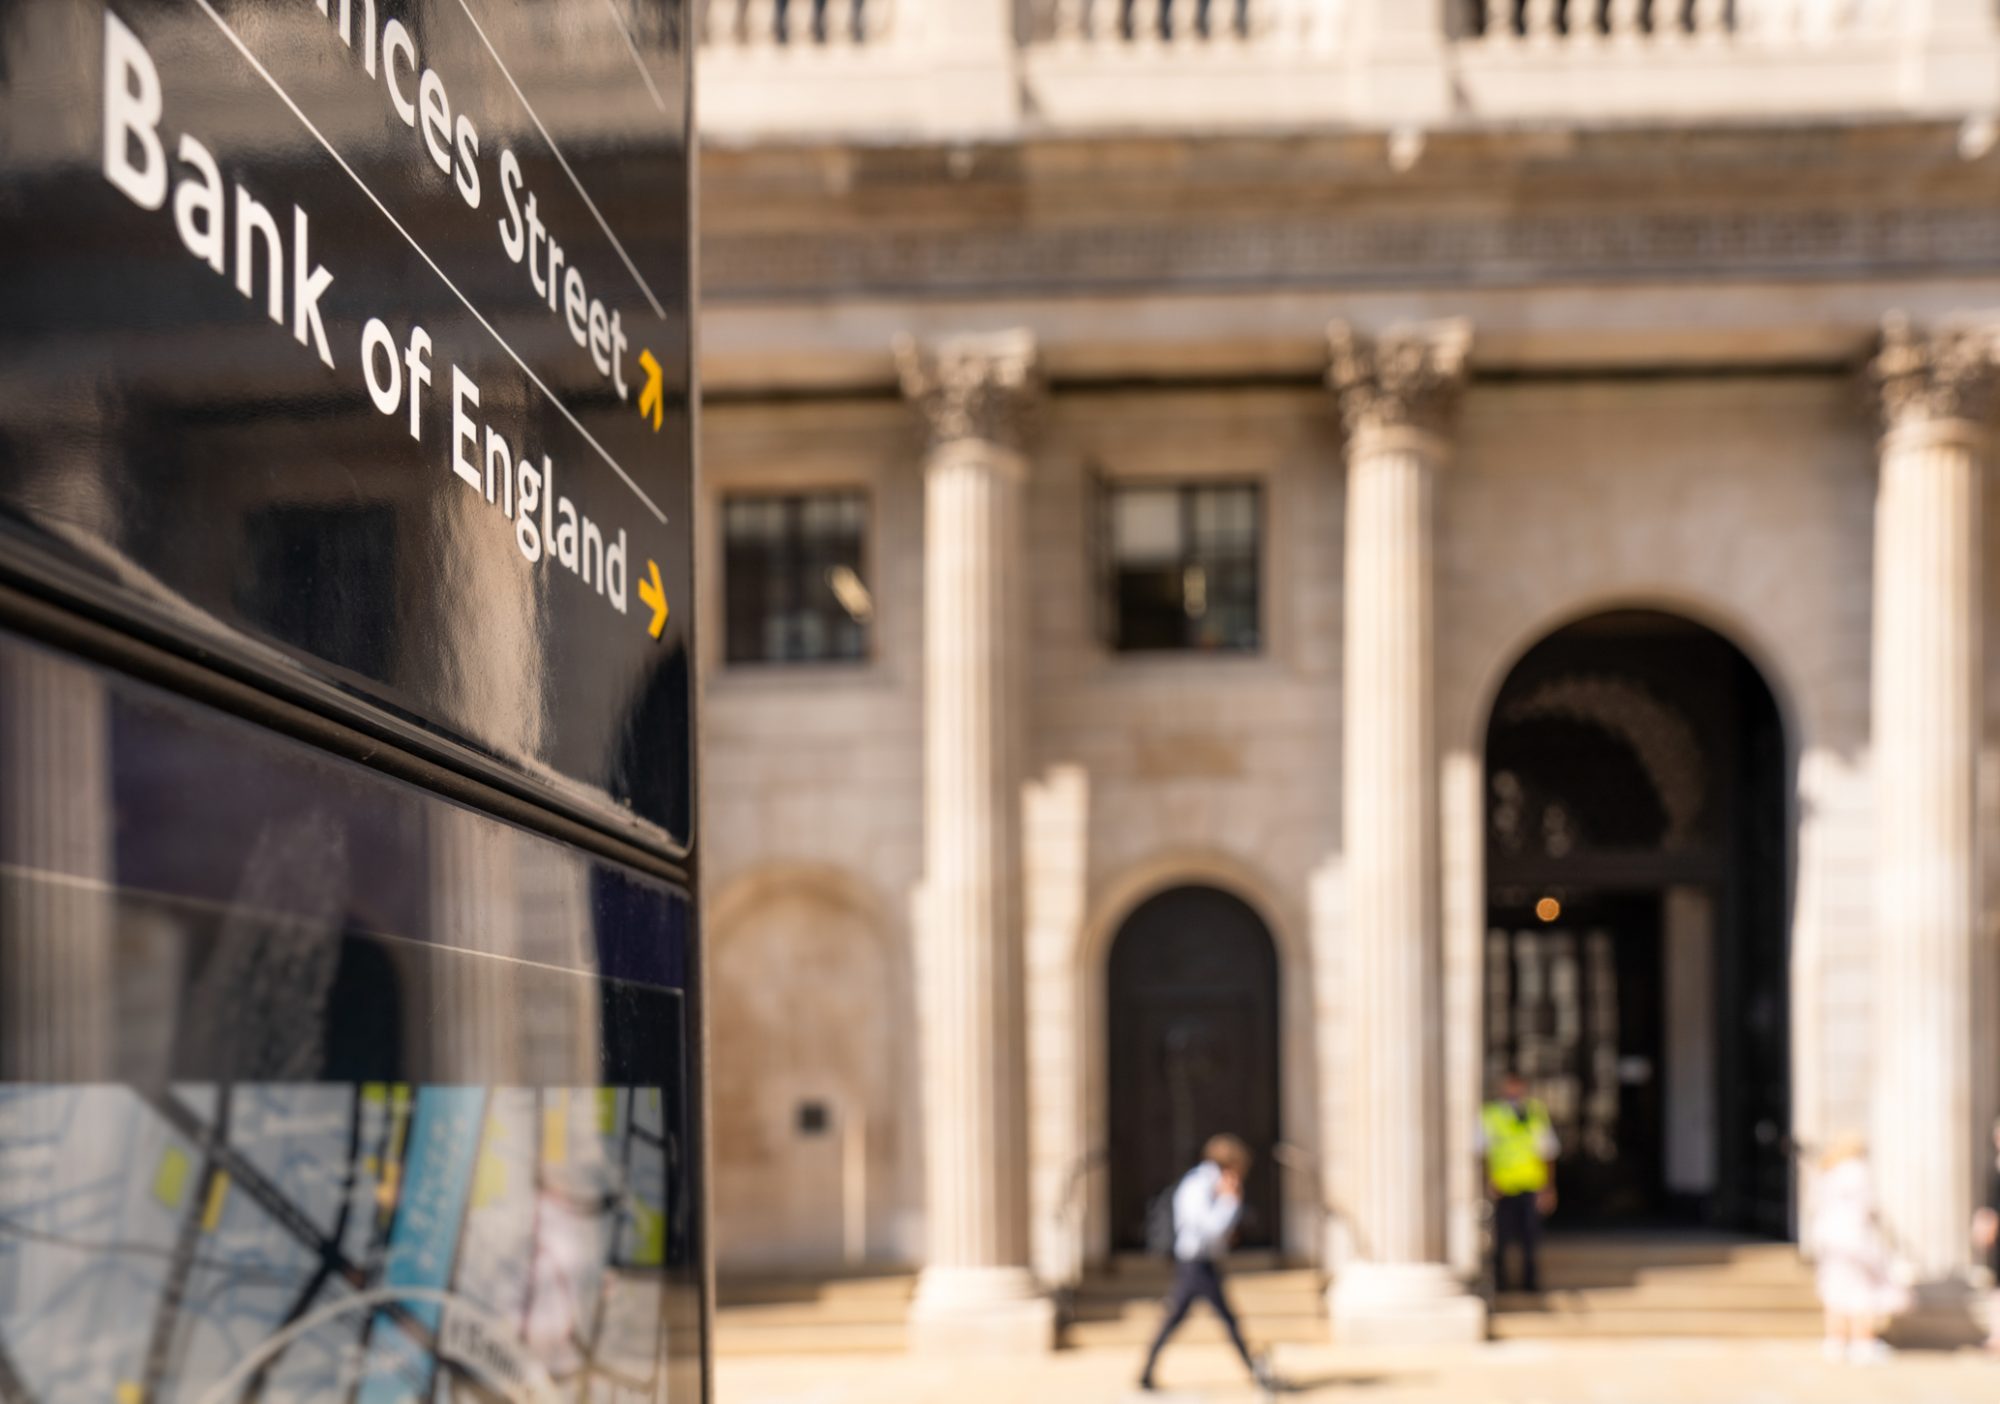 Close-up on a sign for the Bank of England, with a pedestrian passing the institution's main entrance in the background.